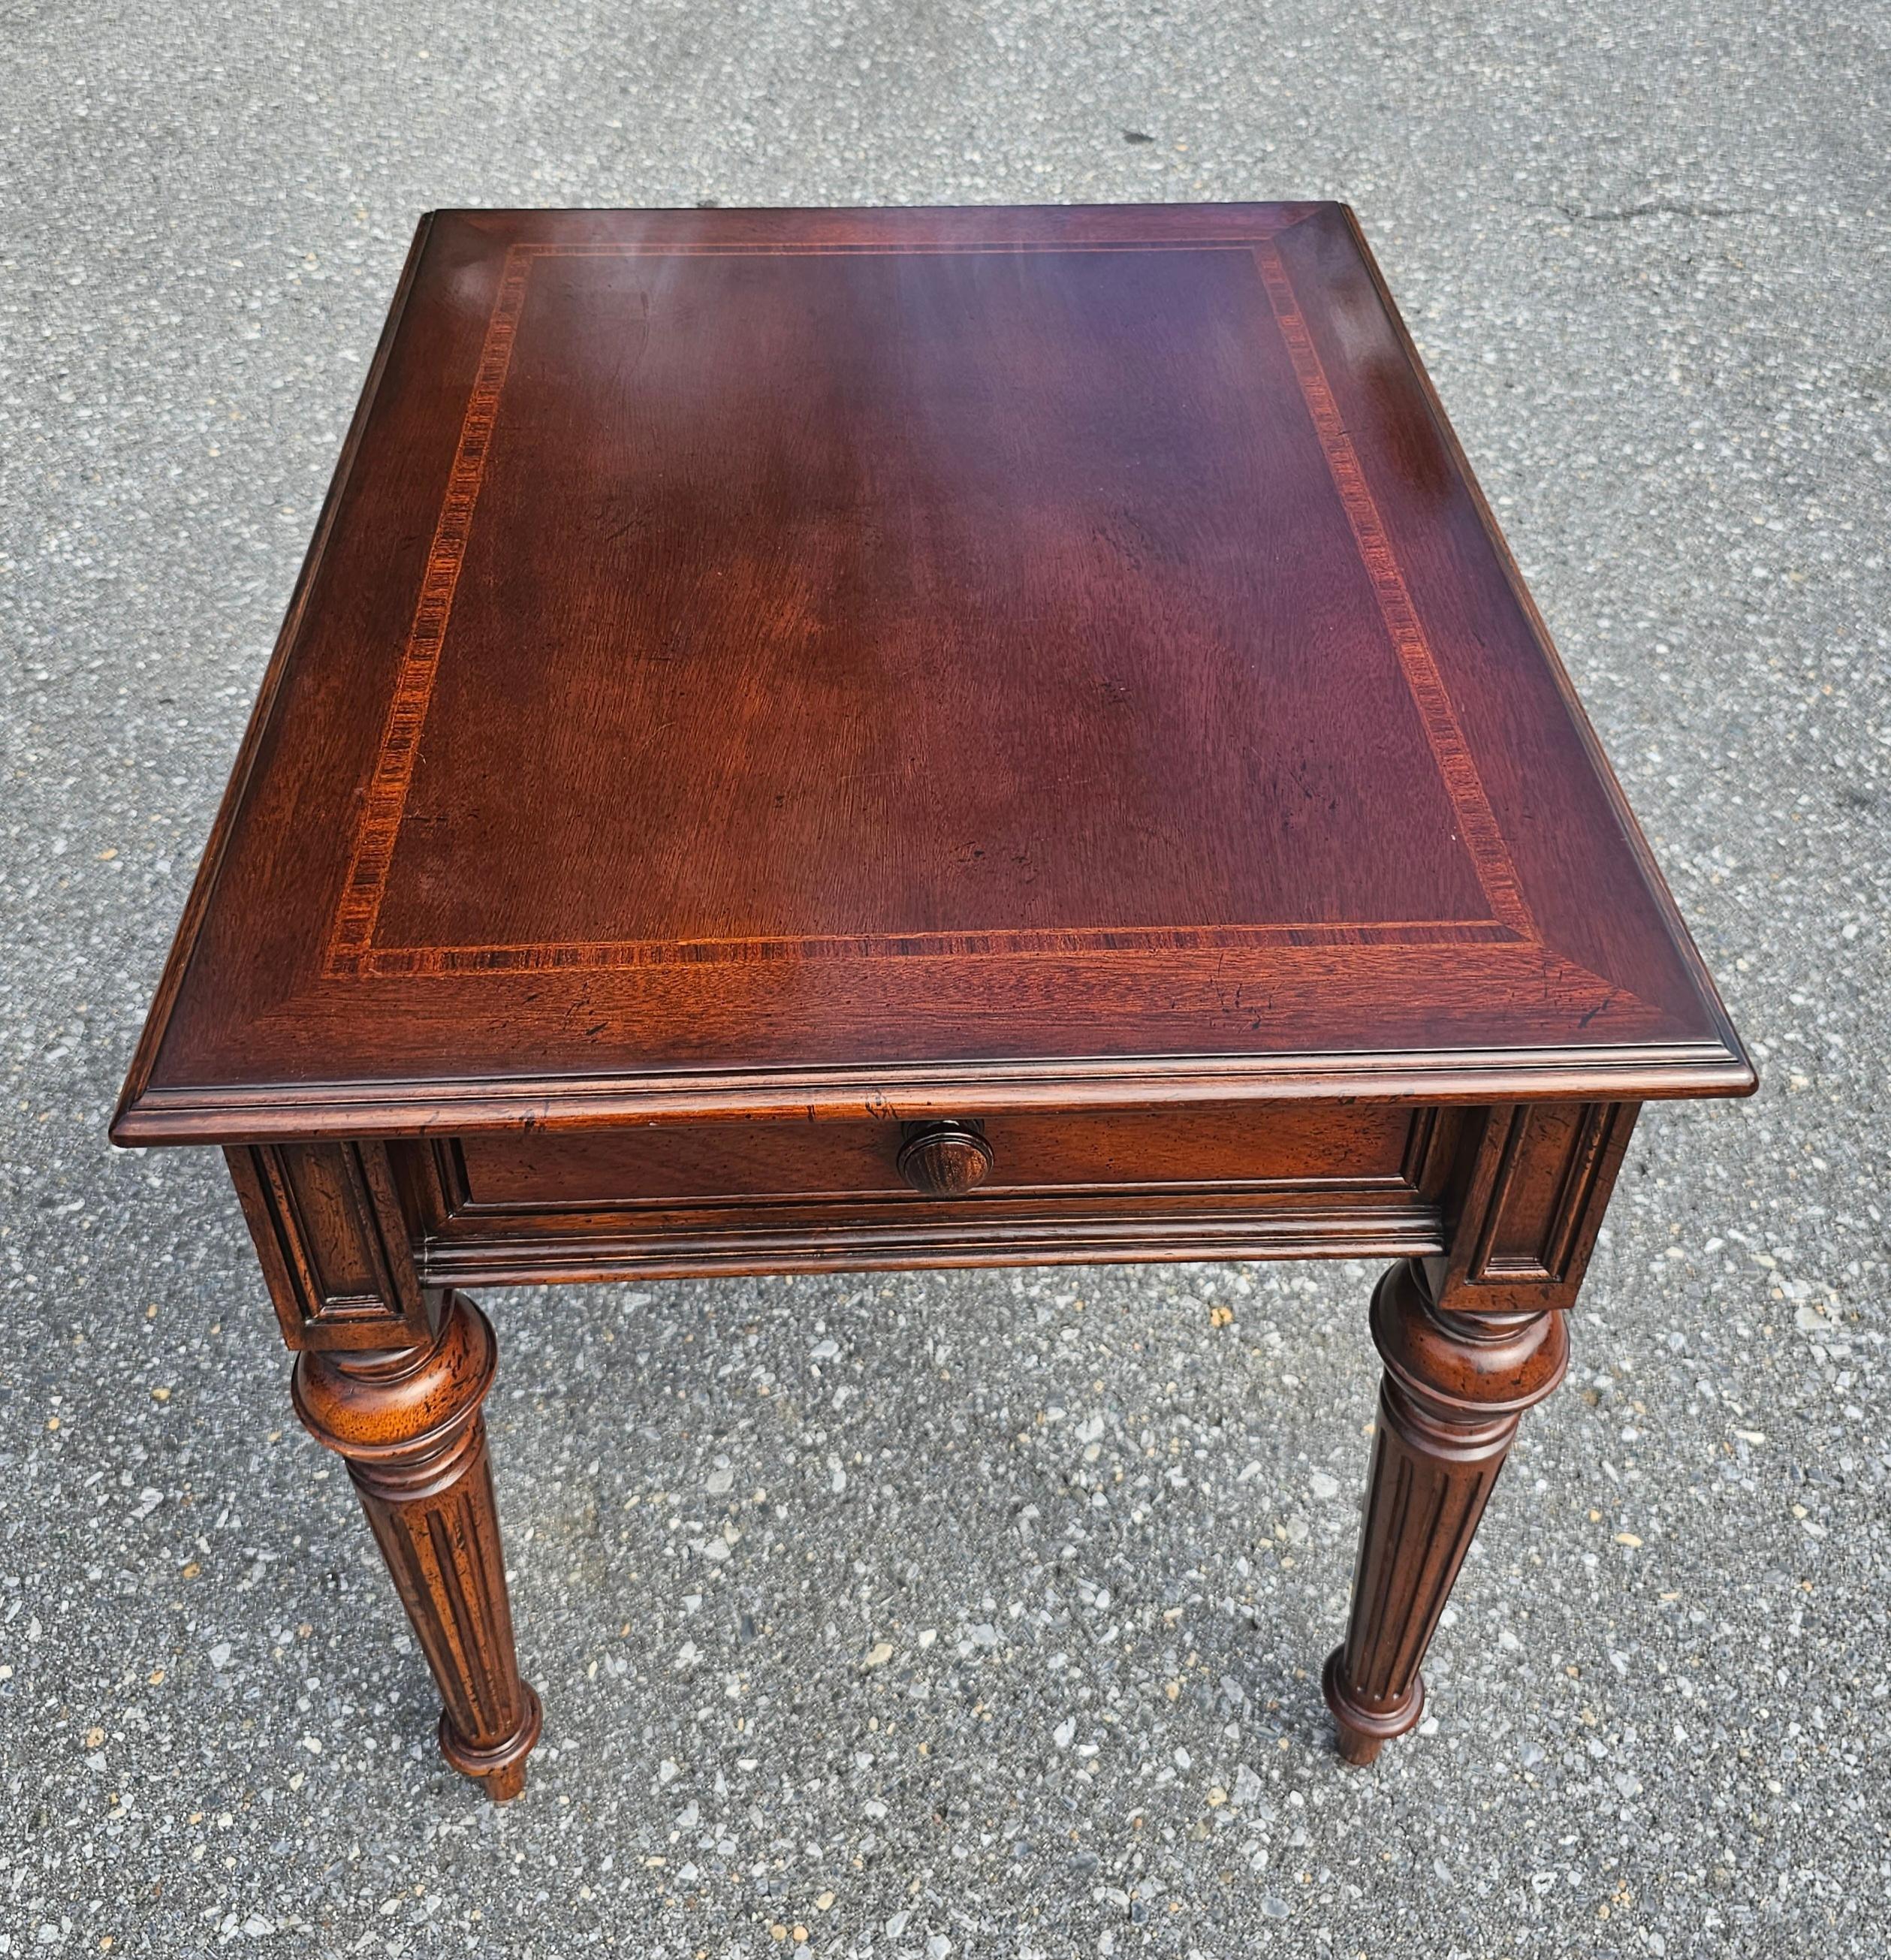 20th Century Thomasville Mahogany single drawer Banded Top Side Table in great vintage condition. Measures 23